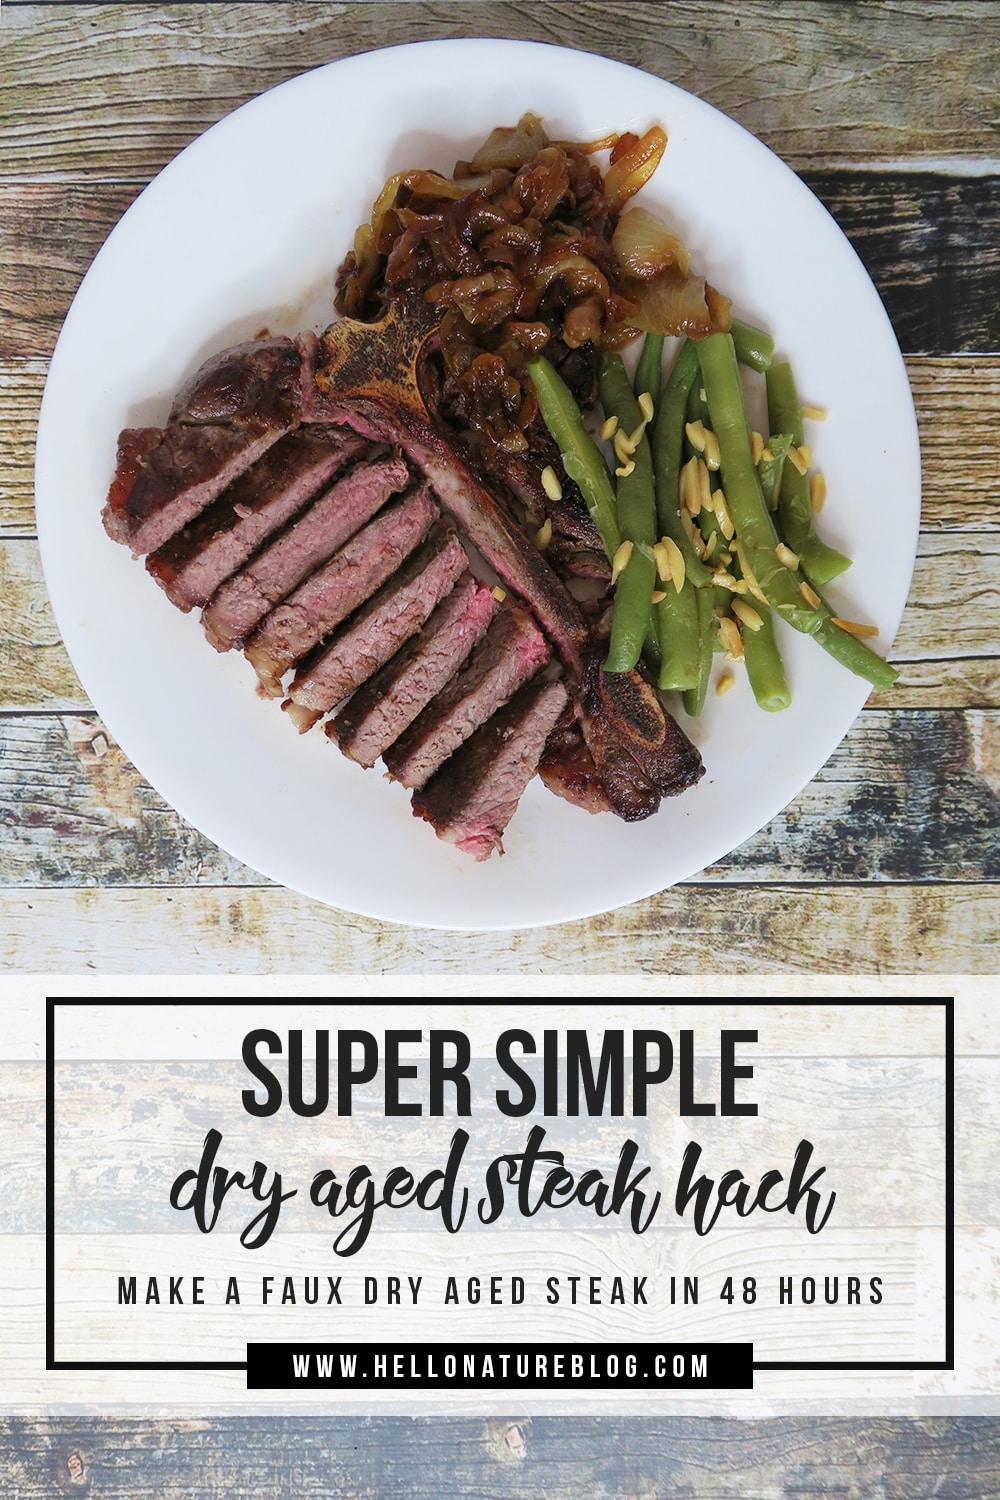 Want to save 30 days and $75? Trick your friends and your taste buds with this 48 hour faux dry aged steak hack! You'll pay less than $15 a pound for this delicious dish.